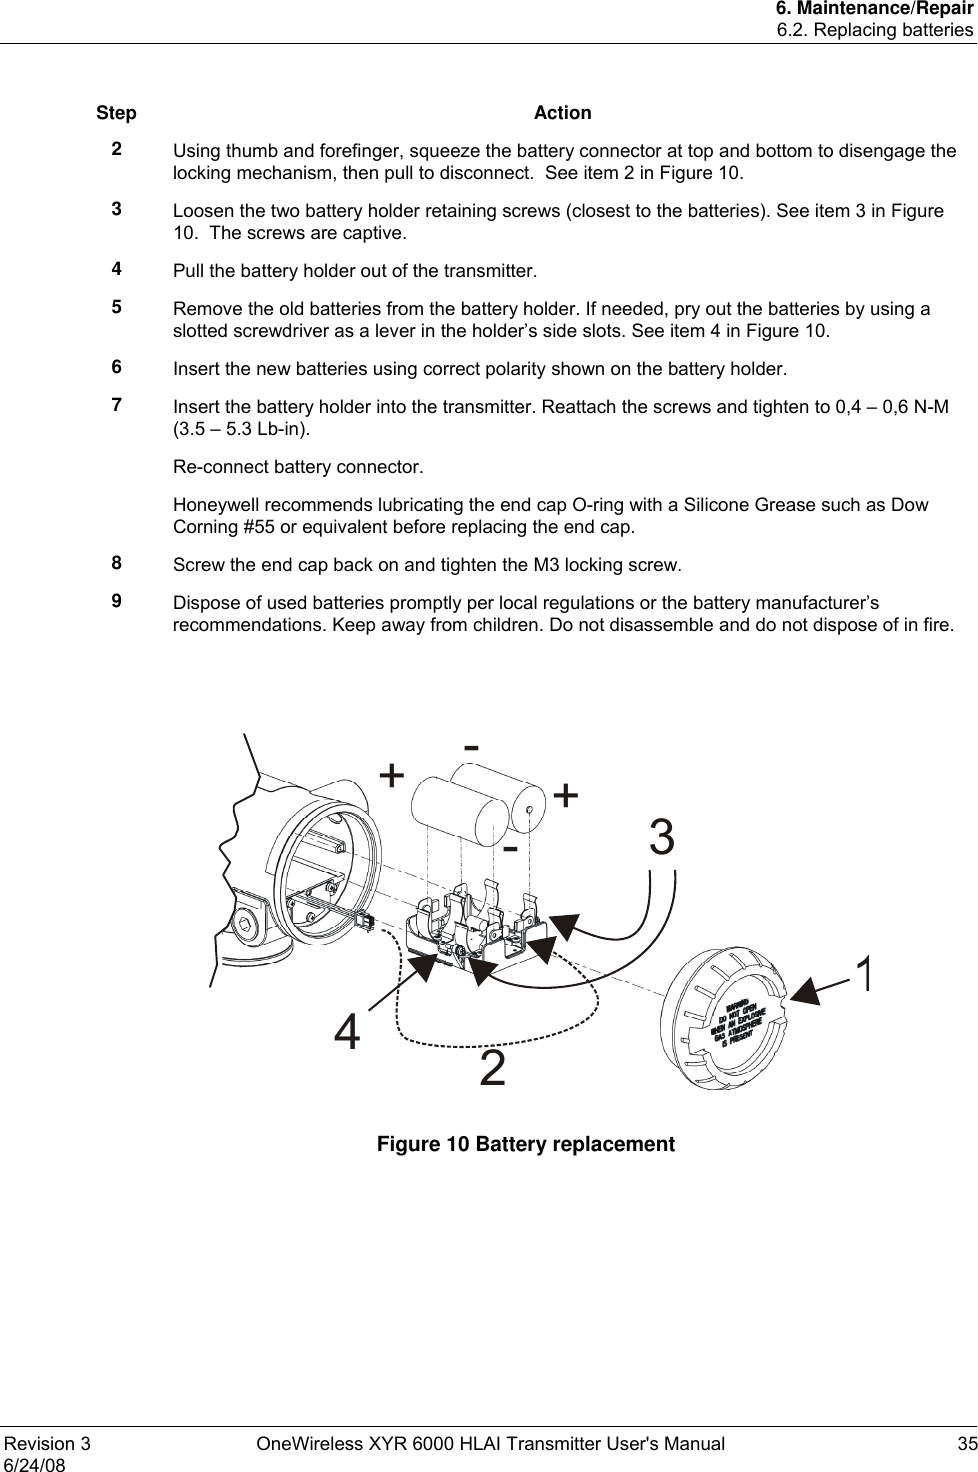 6. Maintenance/Repair 6.2. Replacing batteries Revision 3  OneWireless XYR 6000 HLAI Transmitter User&apos;s Manual  35 6/24/08  Step Action 2  Using thumb and forefinger, squeeze the battery connector at top and bottom to disengage the locking mechanism, then pull to disconnect.  See item 2 in Figure 10. 3  Loosen the two battery holder retaining screws (closest to the batteries). See item 3 in Figure 10.  The screws are captive. 4  Pull the battery holder out of the transmitter. 5  Remove the old batteries from the battery holder. If needed, pry out the batteries by using a slotted screwdriver as a lever in the holder’s side slots. See item 4 in Figure 10. 6  Insert the new batteries using correct polarity shown on the battery holder. 7  Insert the battery holder into the transmitter. Reattach the screws and tighten to 0,4 – 0,6 N-M (3.5 – 5.3 Lb-in). Re-connect battery connector. Honeywell recommends lubricating the end cap O-ring with a Silicone Grease such as Dow Corning #55 or equivalent before replacing the end cap. 8  Screw the end cap back on and tighten the M3 locking screw. 9  Dispose of used batteries promptly per local regulations or the battery manufacturer’s recommendations. Keep away from children. Do not disassemble and do not dispose of in fire.   12+-+-34  Figure 10 Battery replacement  